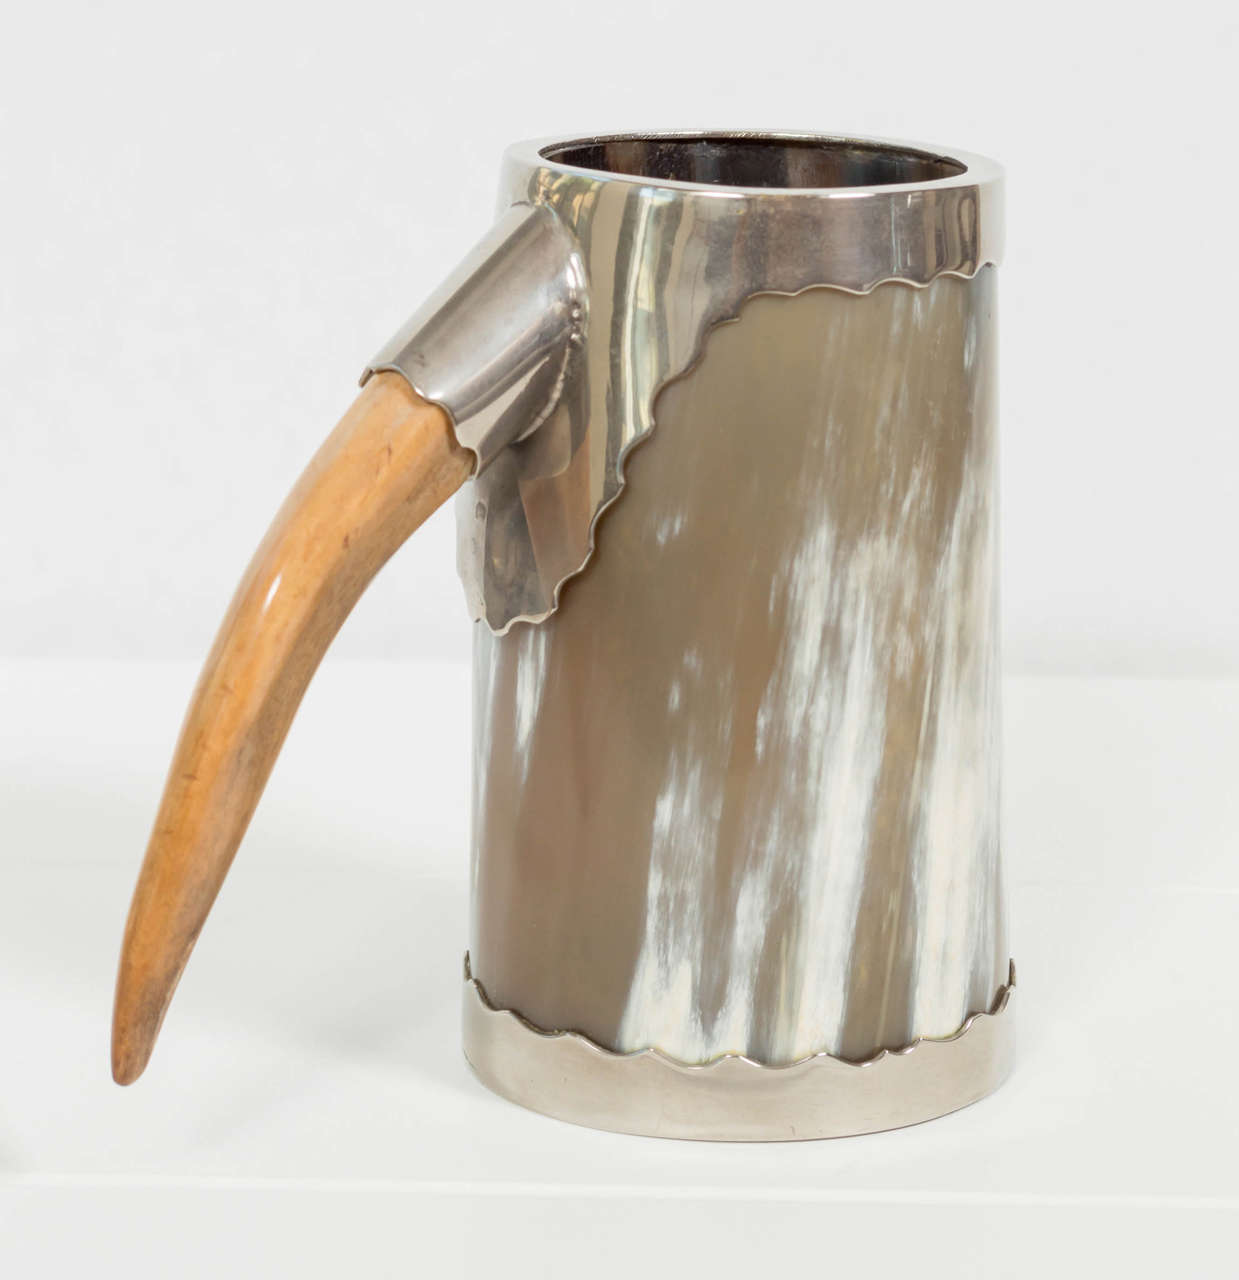 1950s silvered nickel mounted boar tusk and horn beer stein or mug retaining original leather Gucci made in Italy label on bottom.